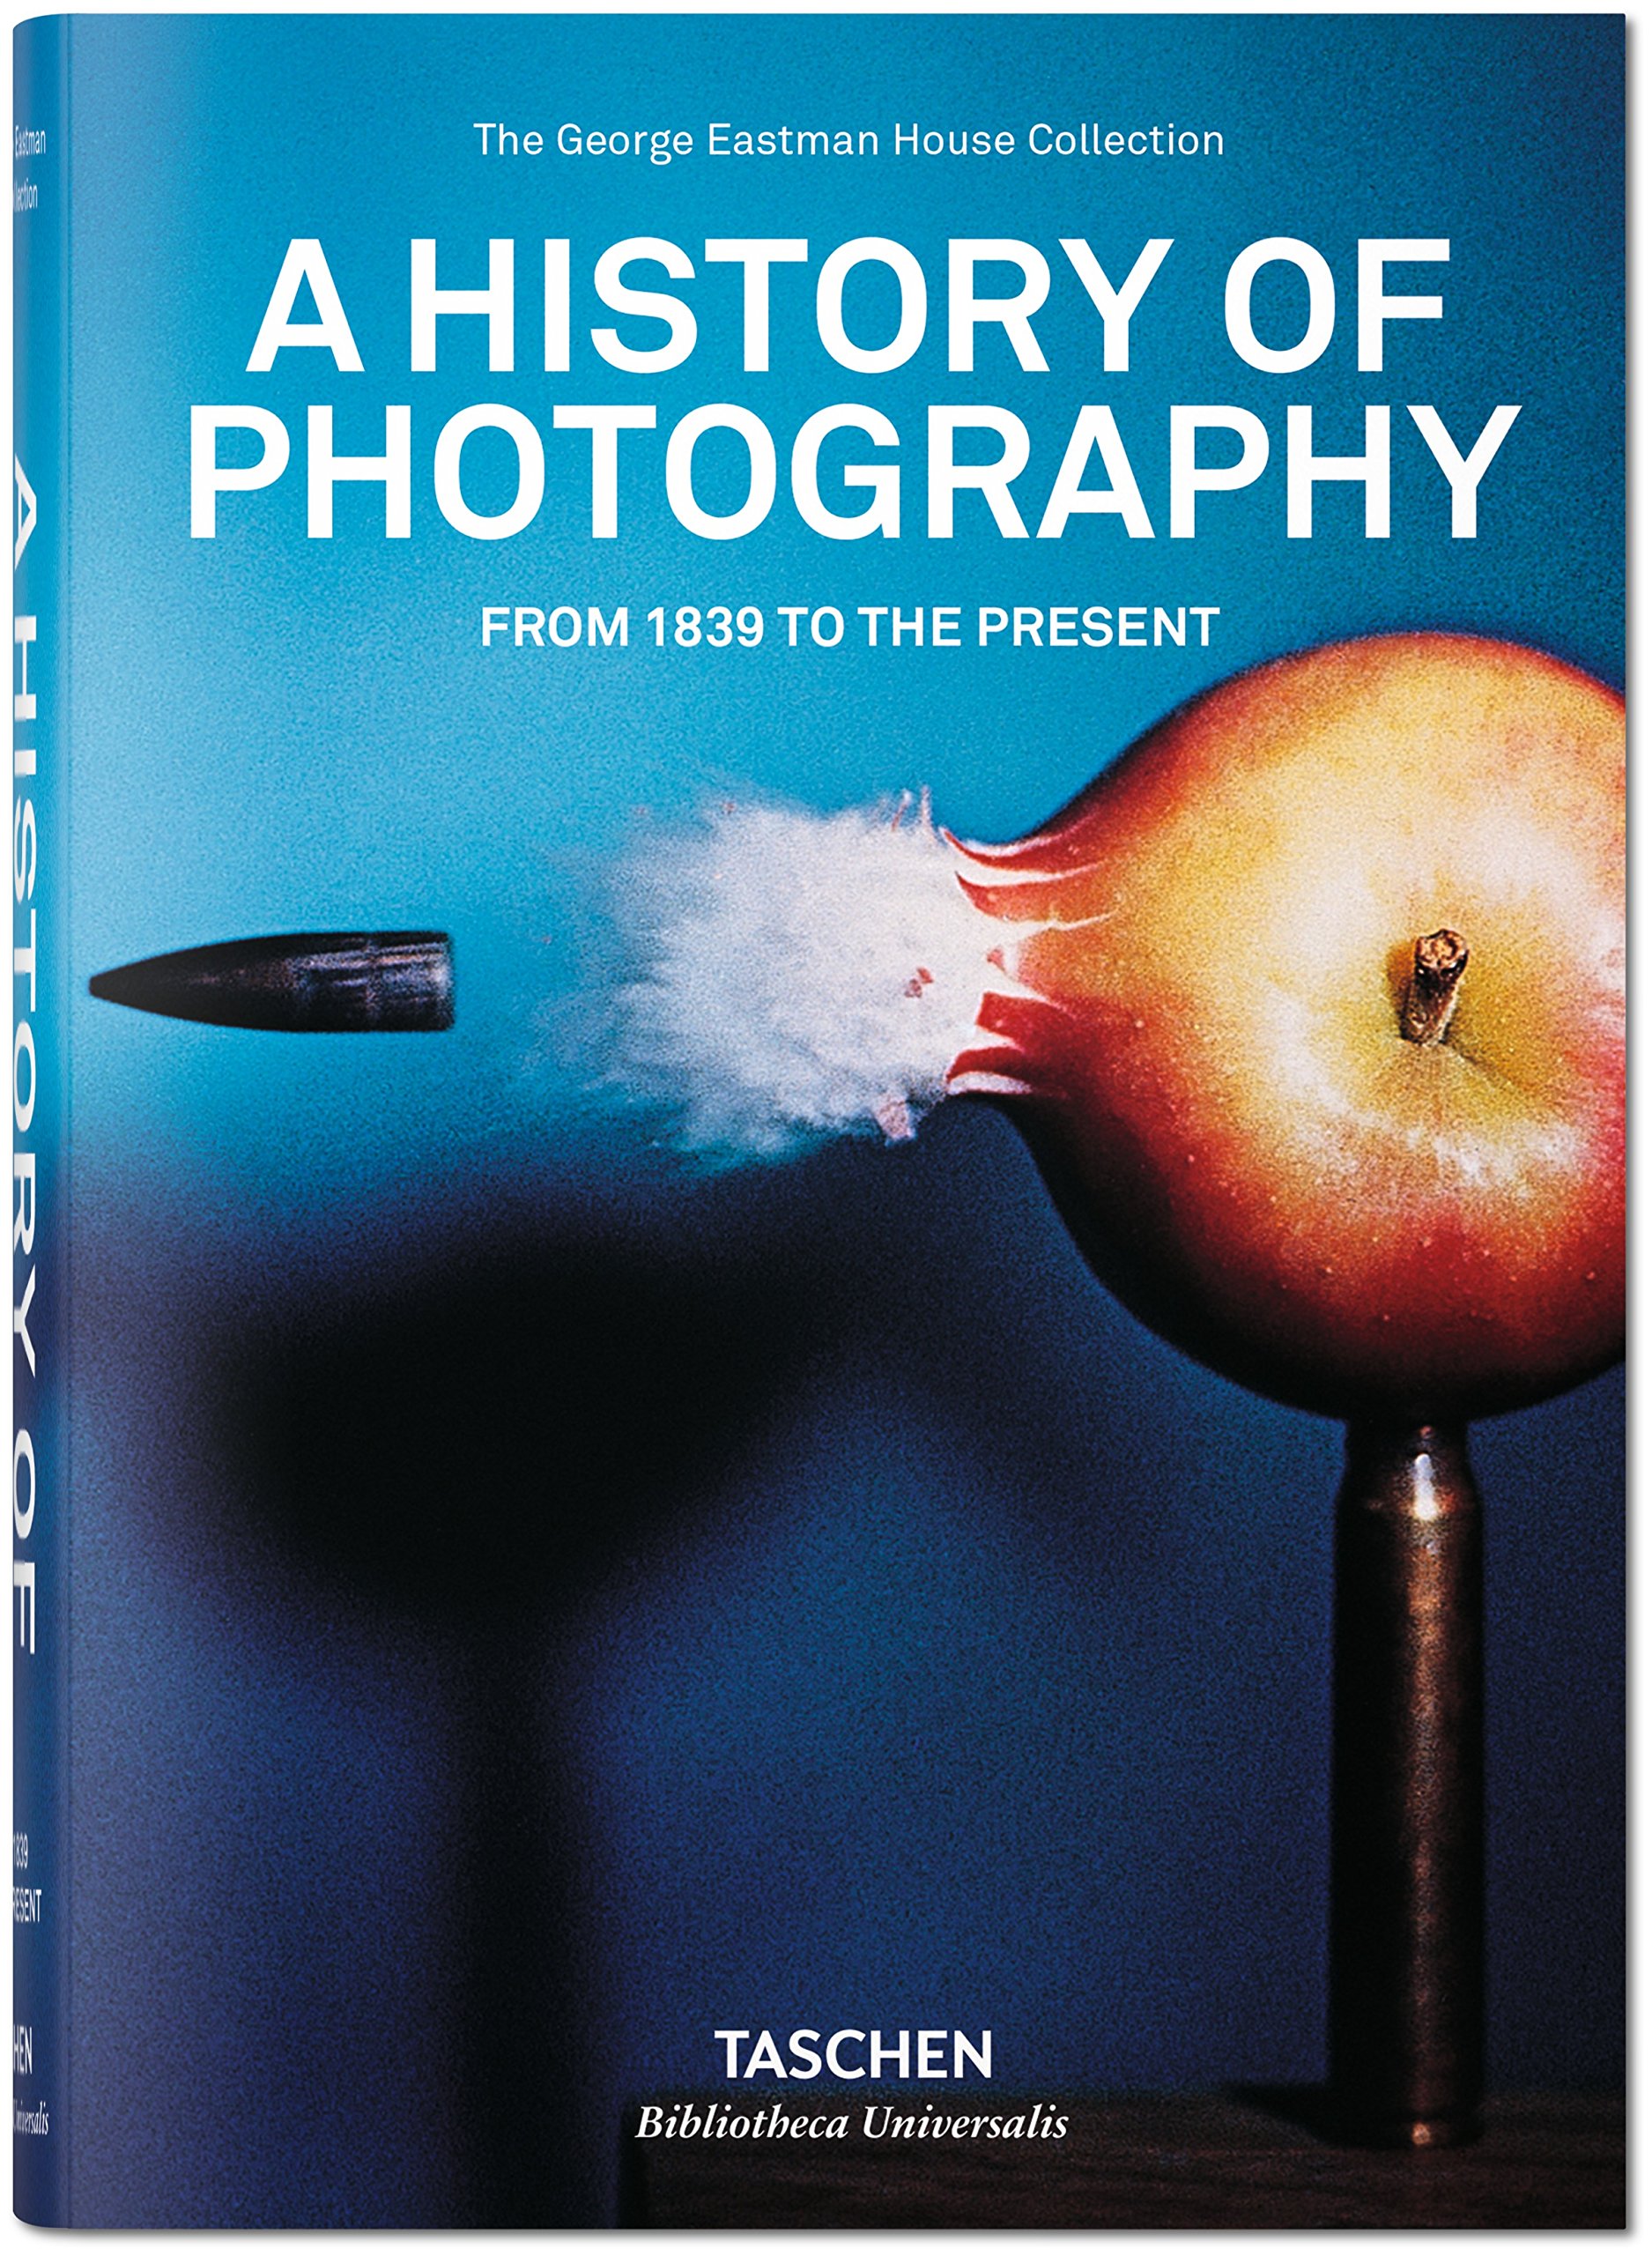 A History of Photography: From 1839 to the Present - Steven Heller